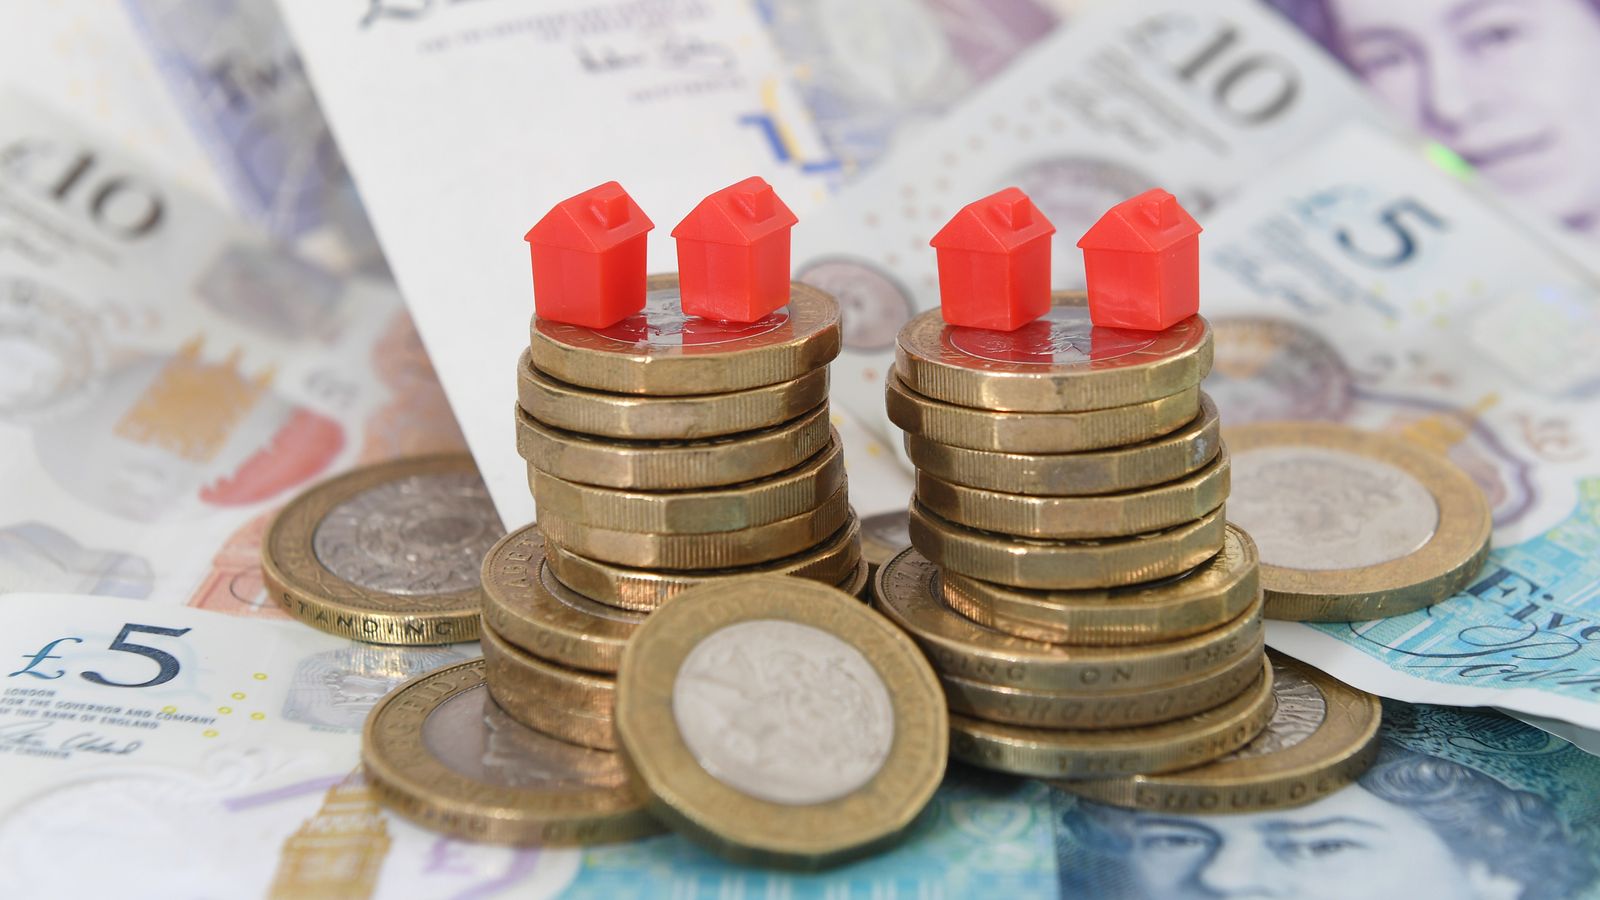 Wait for interest rate cut leads to surprise dip in house price growth